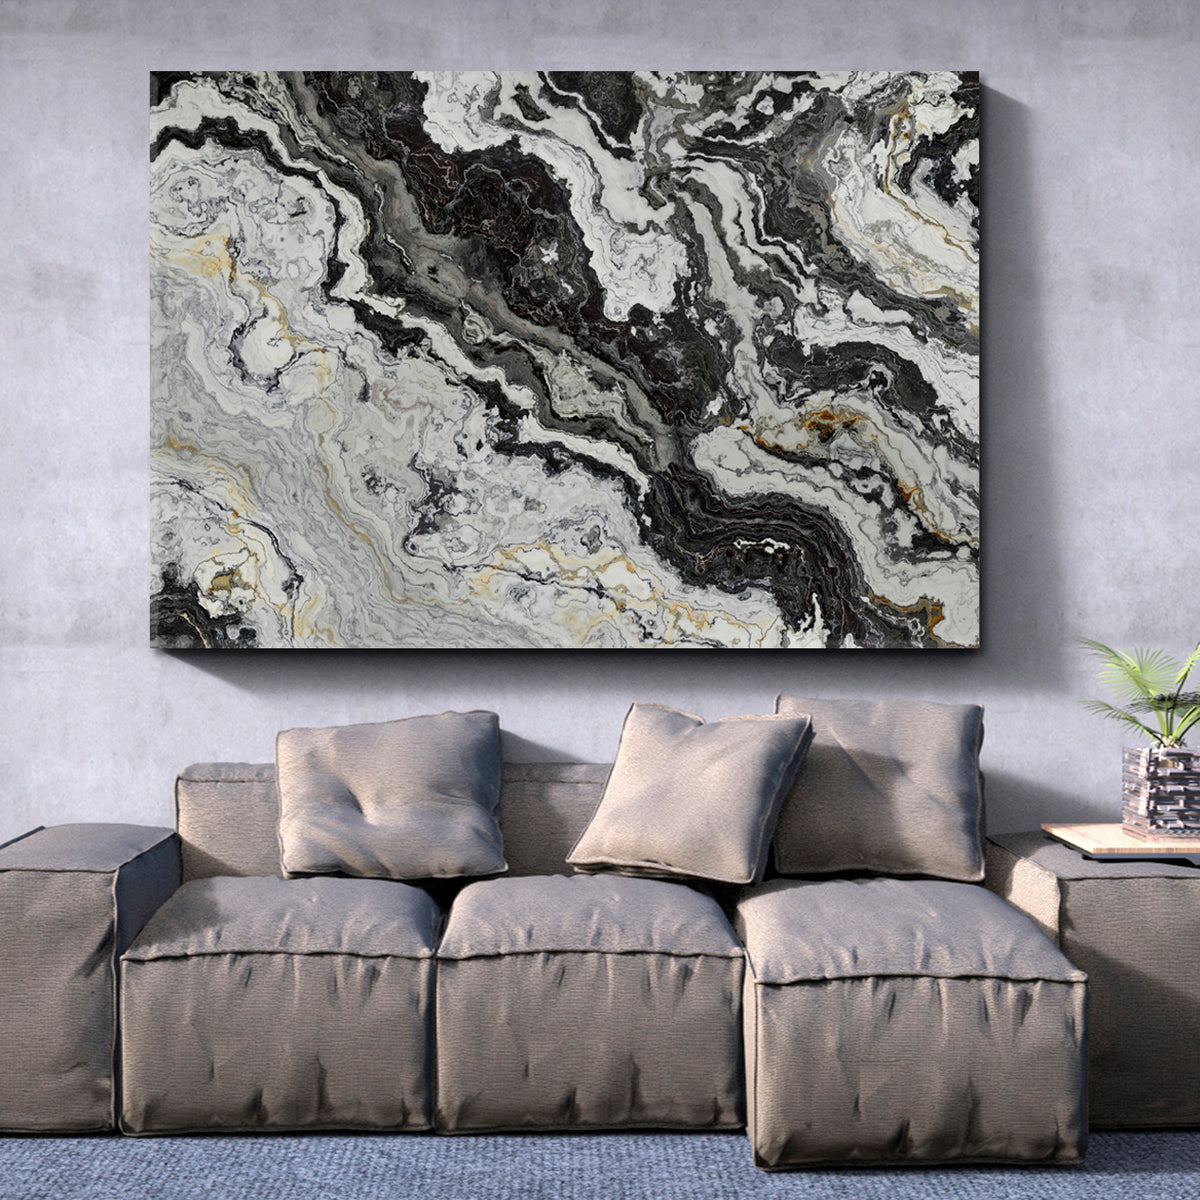 SWIRLS  Black White Marble Pattern Veins Abstract Abstract Art Print Artesty 1 panel 24" x 16" 